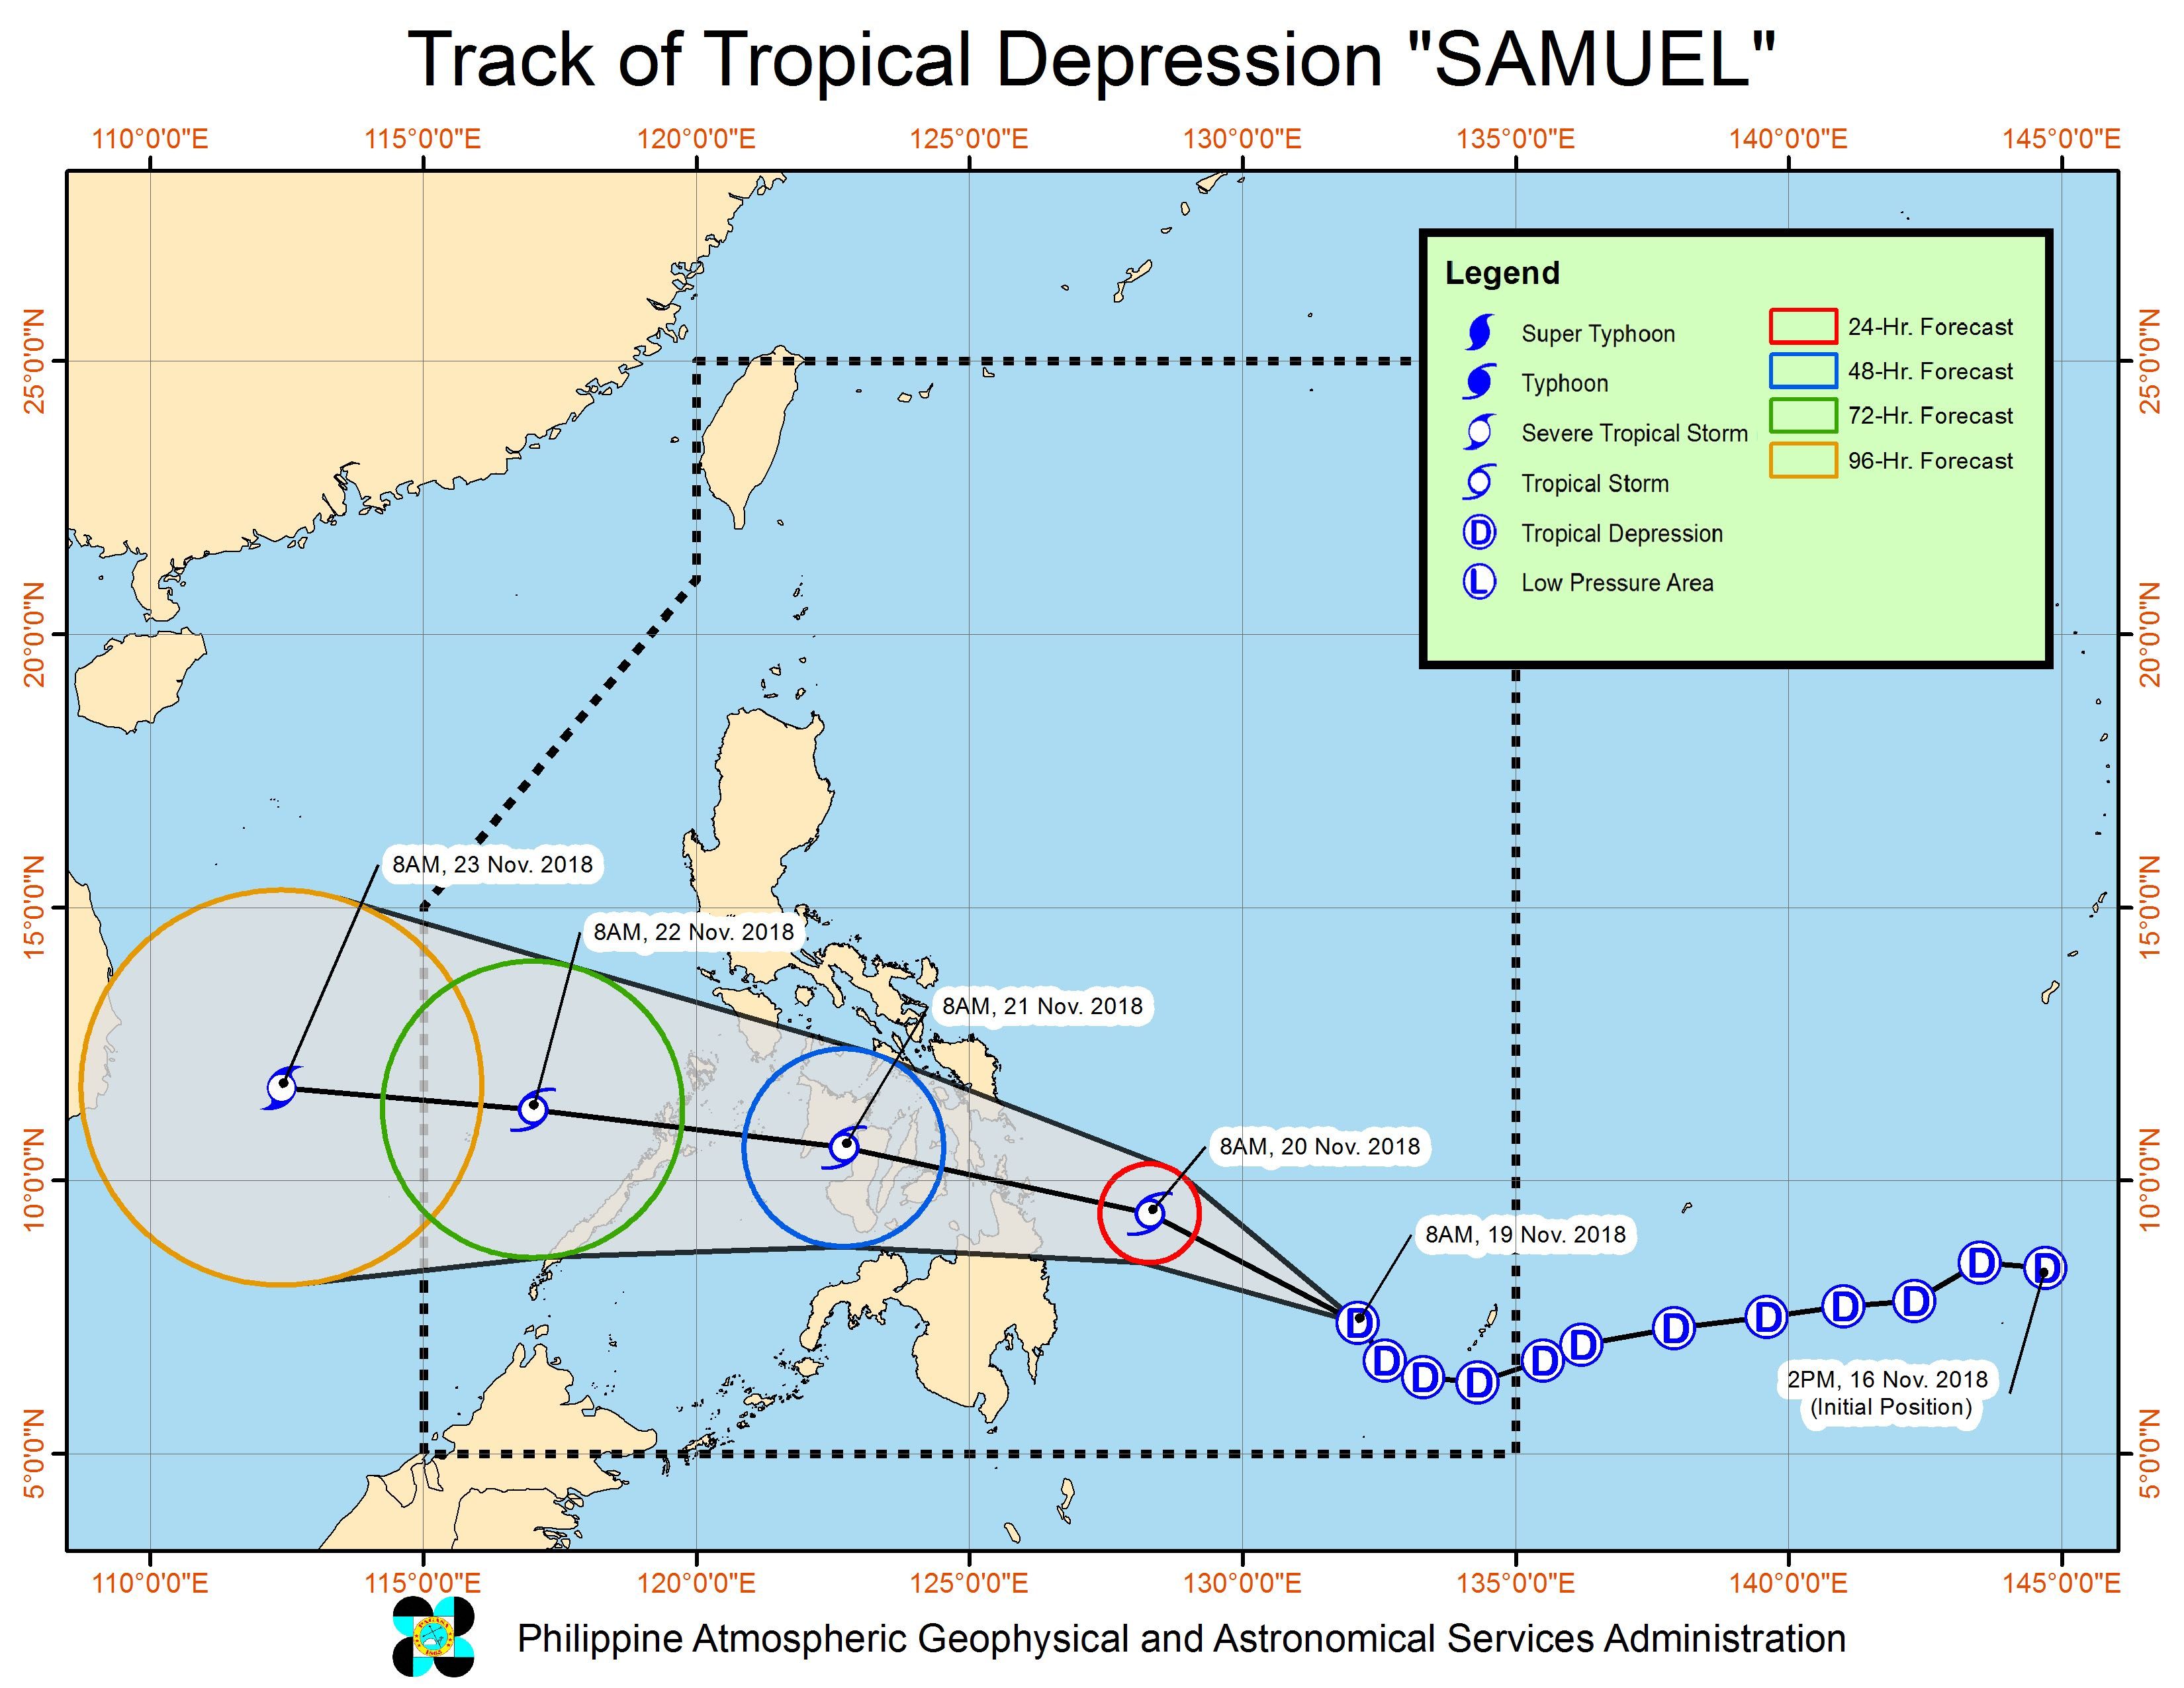 Forecast track of Tropical Depression Samuel as of November 19, 2018, 11 am. Image from PAGASA 